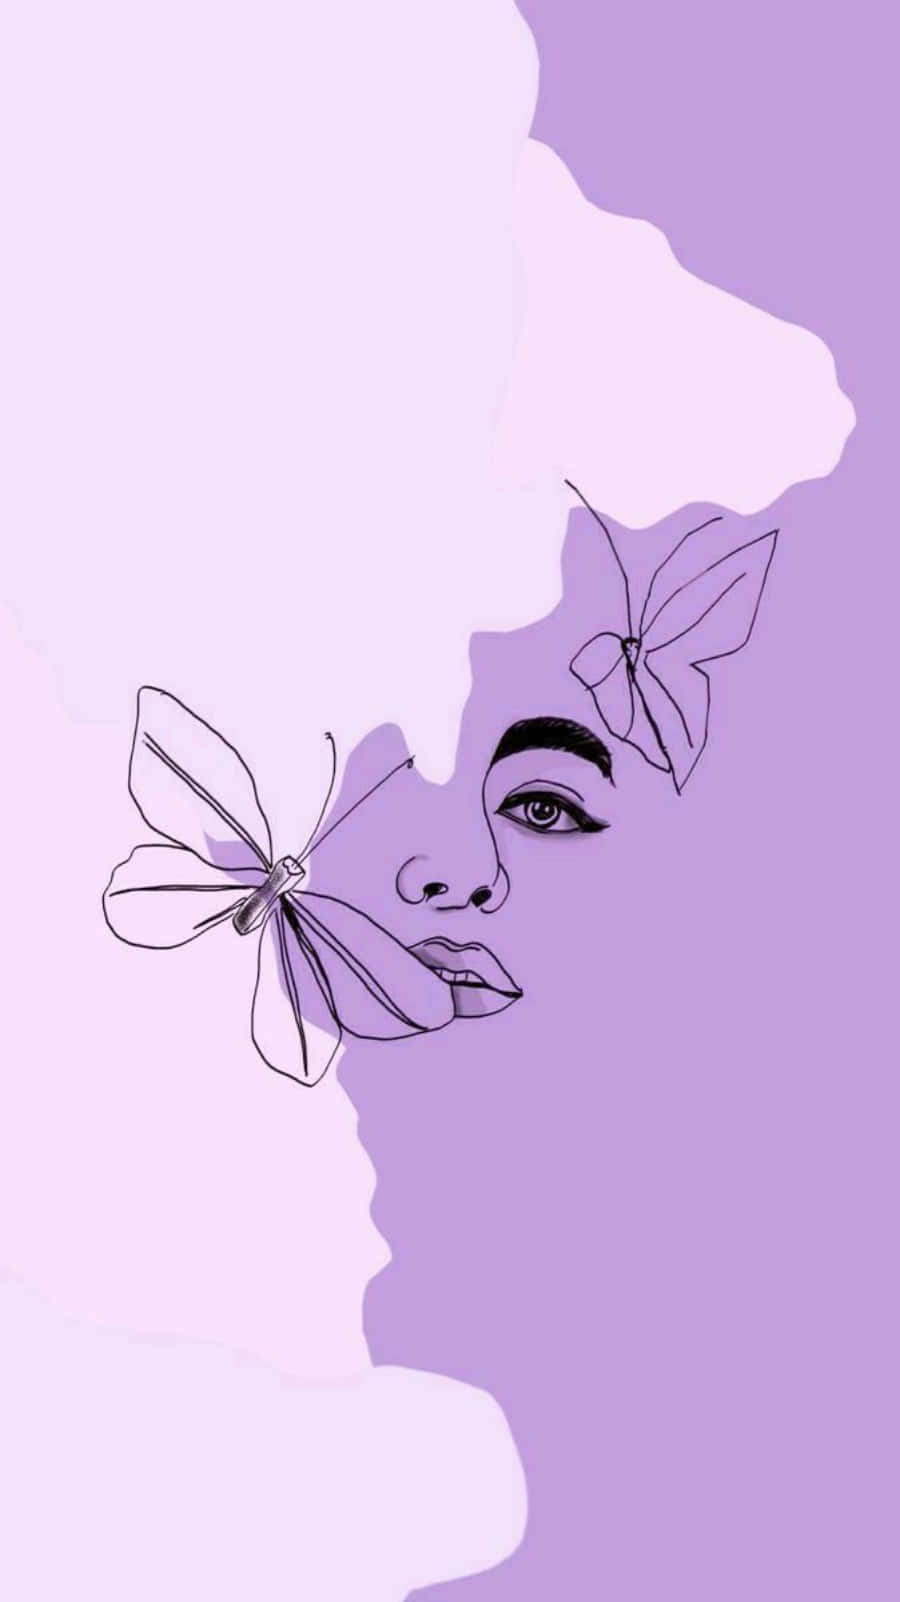 Girly Tumblr Face And Butterflies Wallpaper